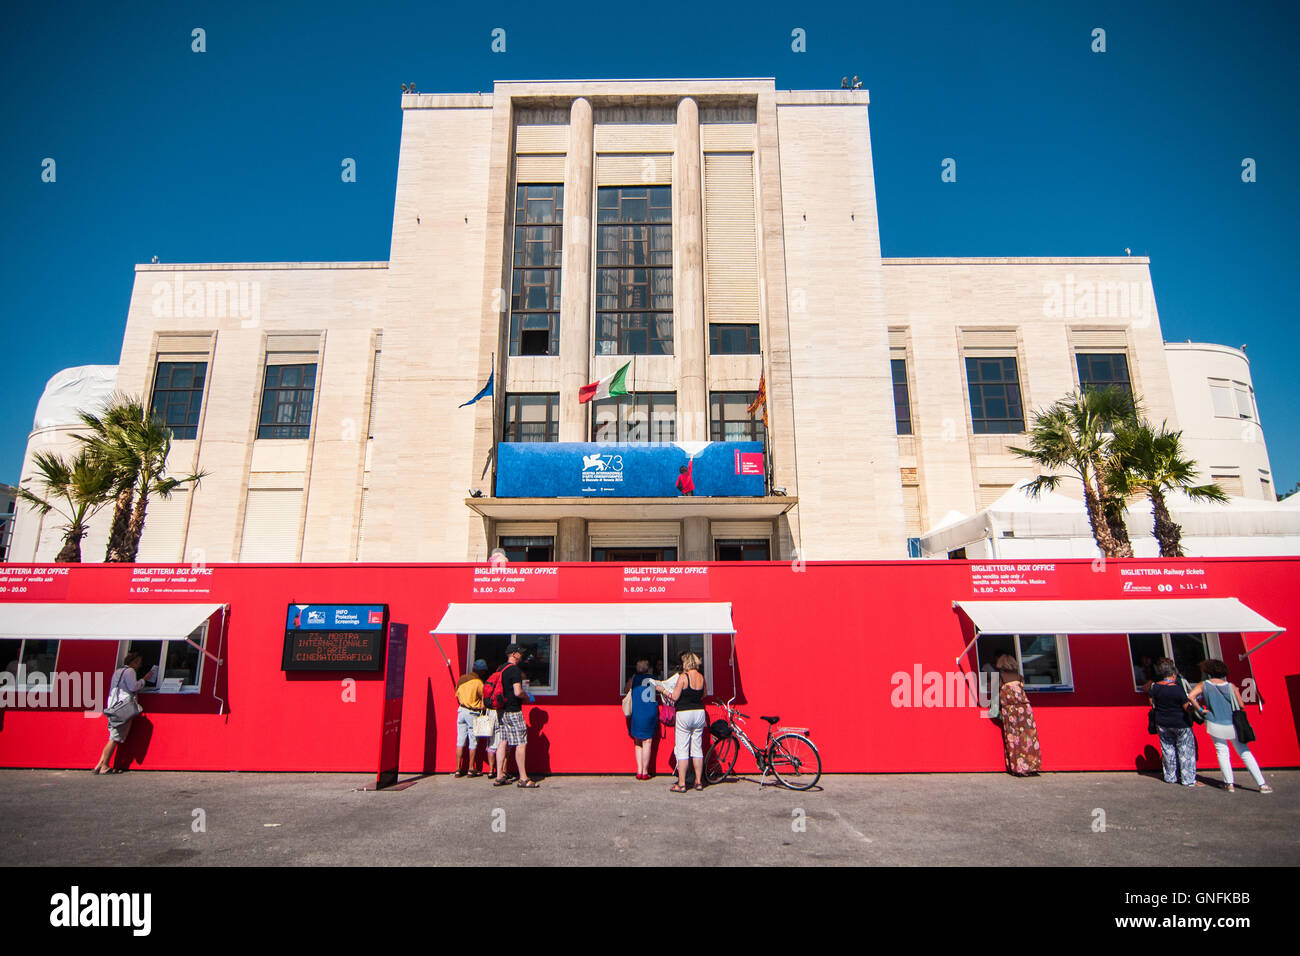 Venice, Italy. 31th August, 2016. People attend at the ticket area in front of the Casinò palace of the 73rd Venice Film Festival. Credit:  Simone Padovani / Awakening / Alamy Live News Stock Photo